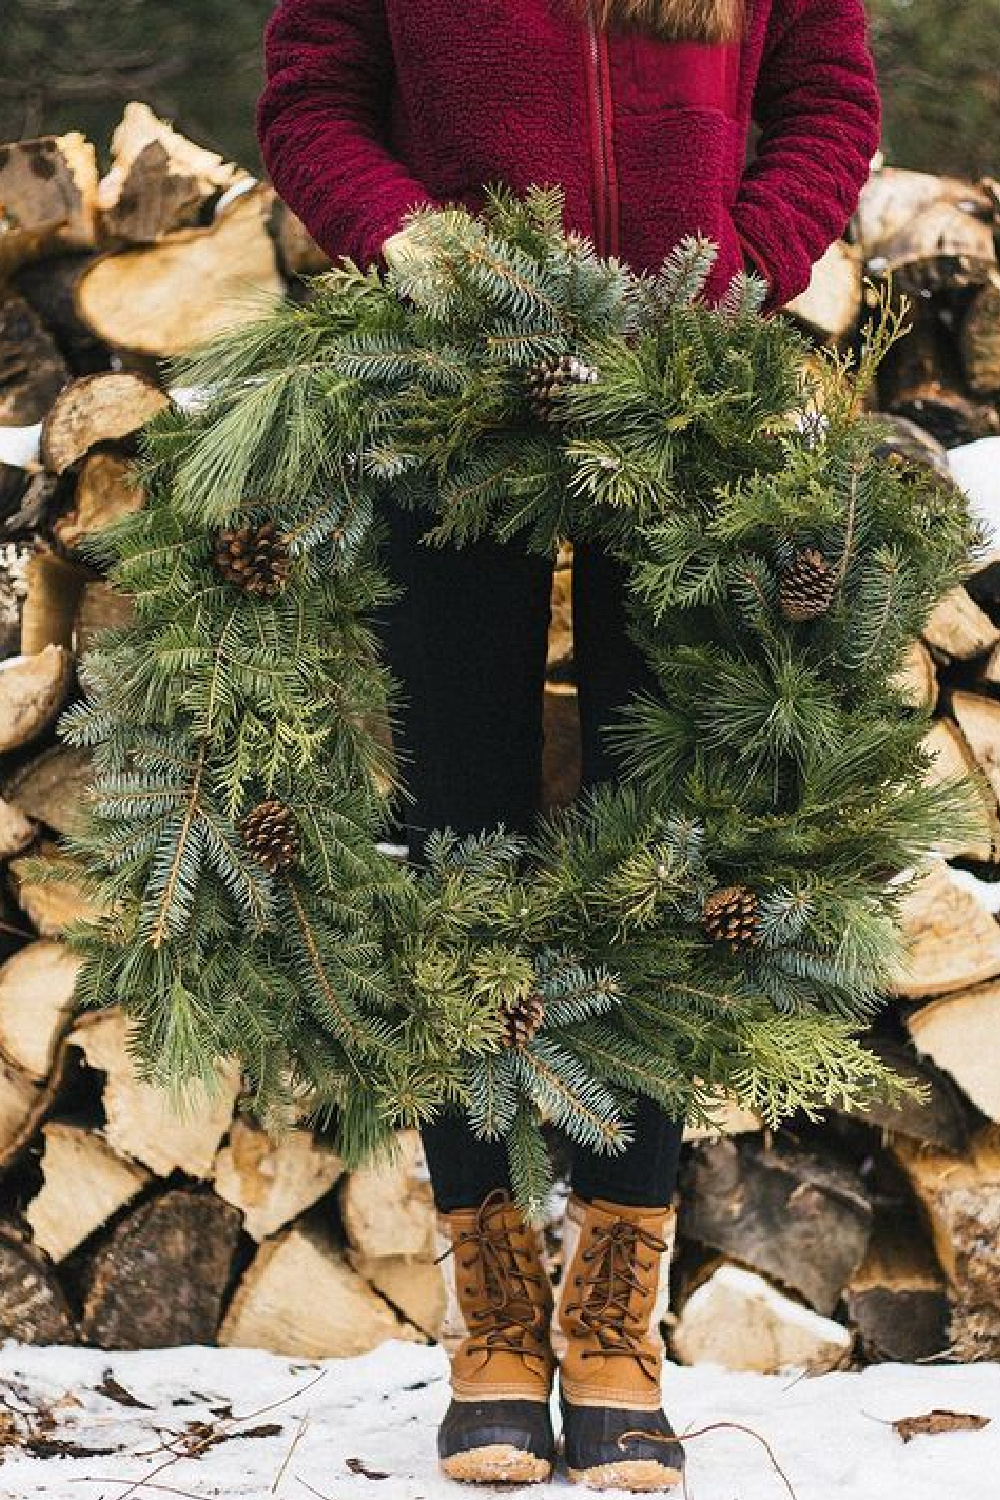 Holiday wreath with firewood and red sweater - @missnortherner. #christmaswreaths